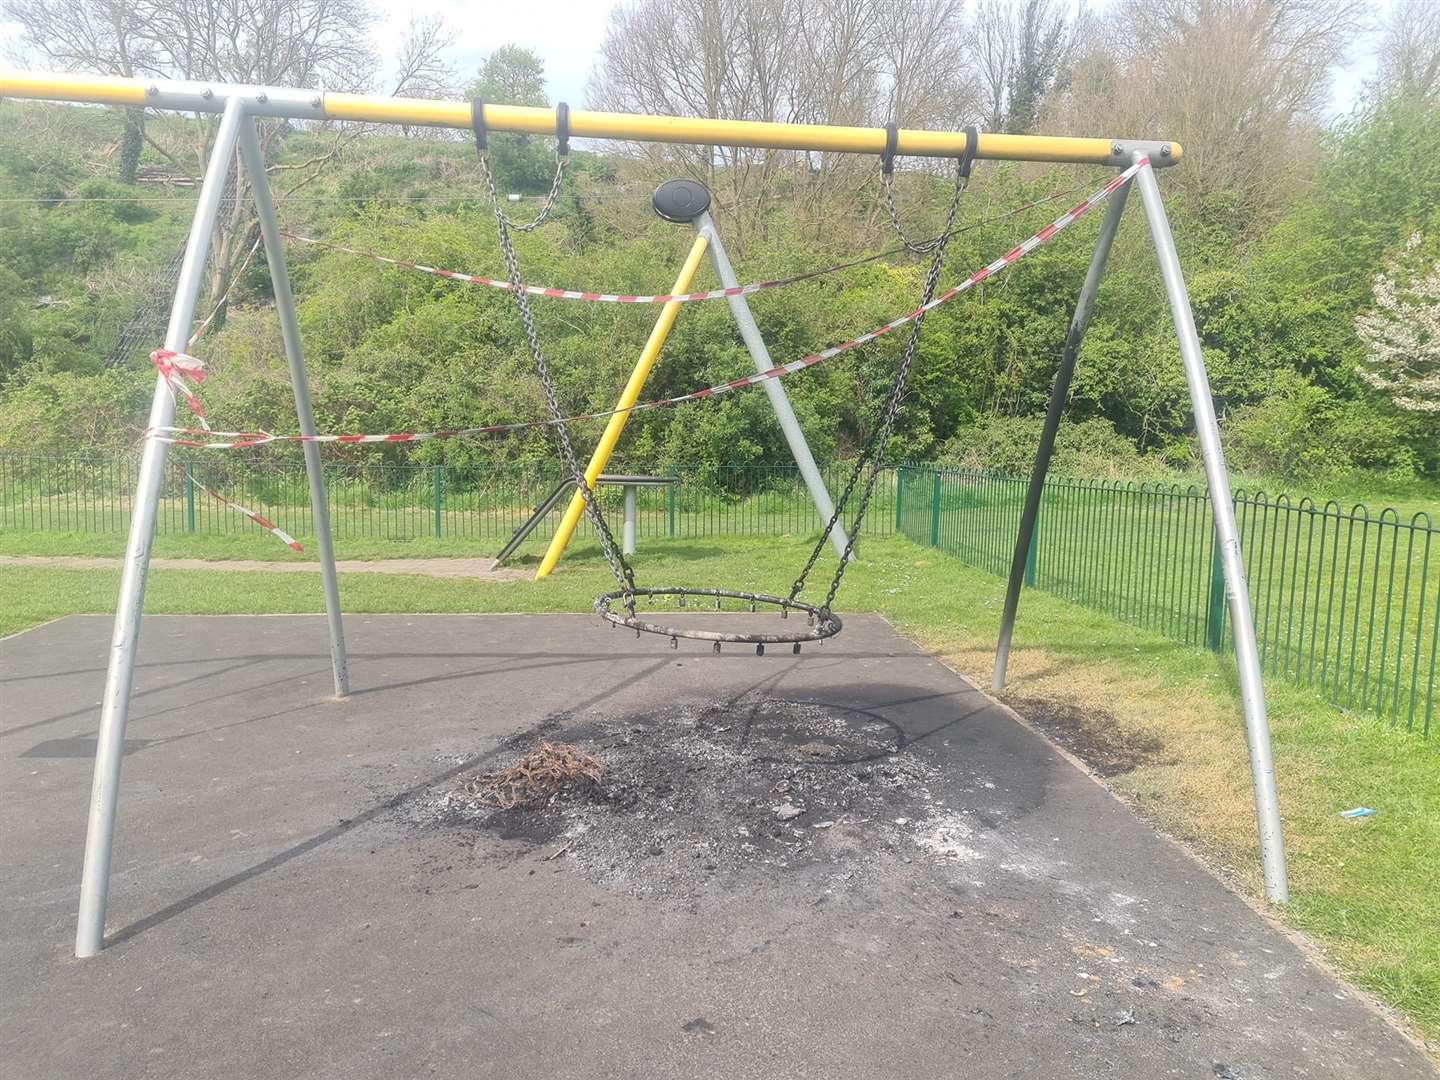 The swing set has been taped off. Picture: Tracy Kay